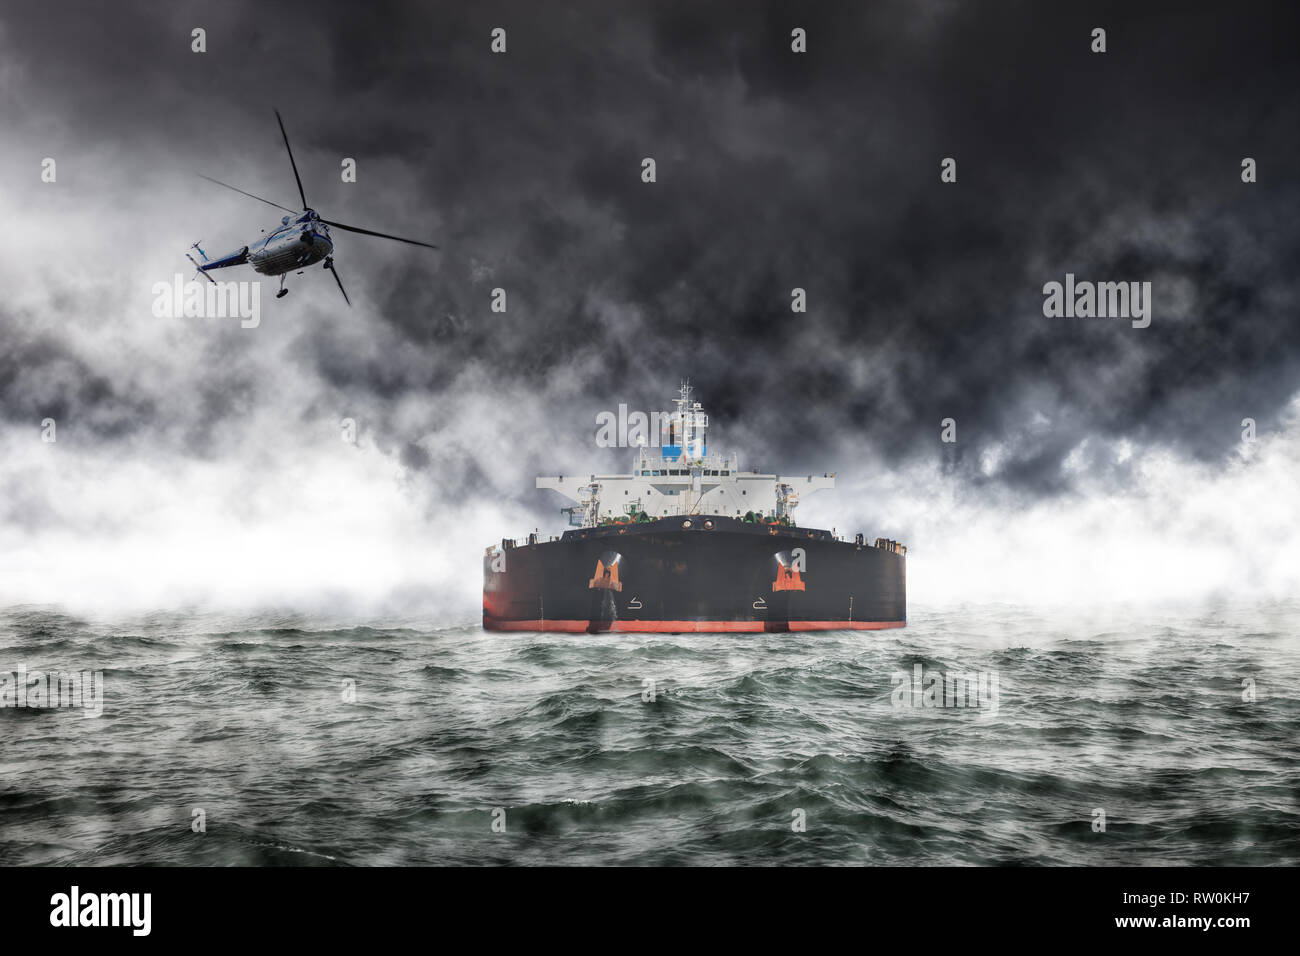 A helicopter rescue mission in difficult stormy weather at sea. Stock Photo